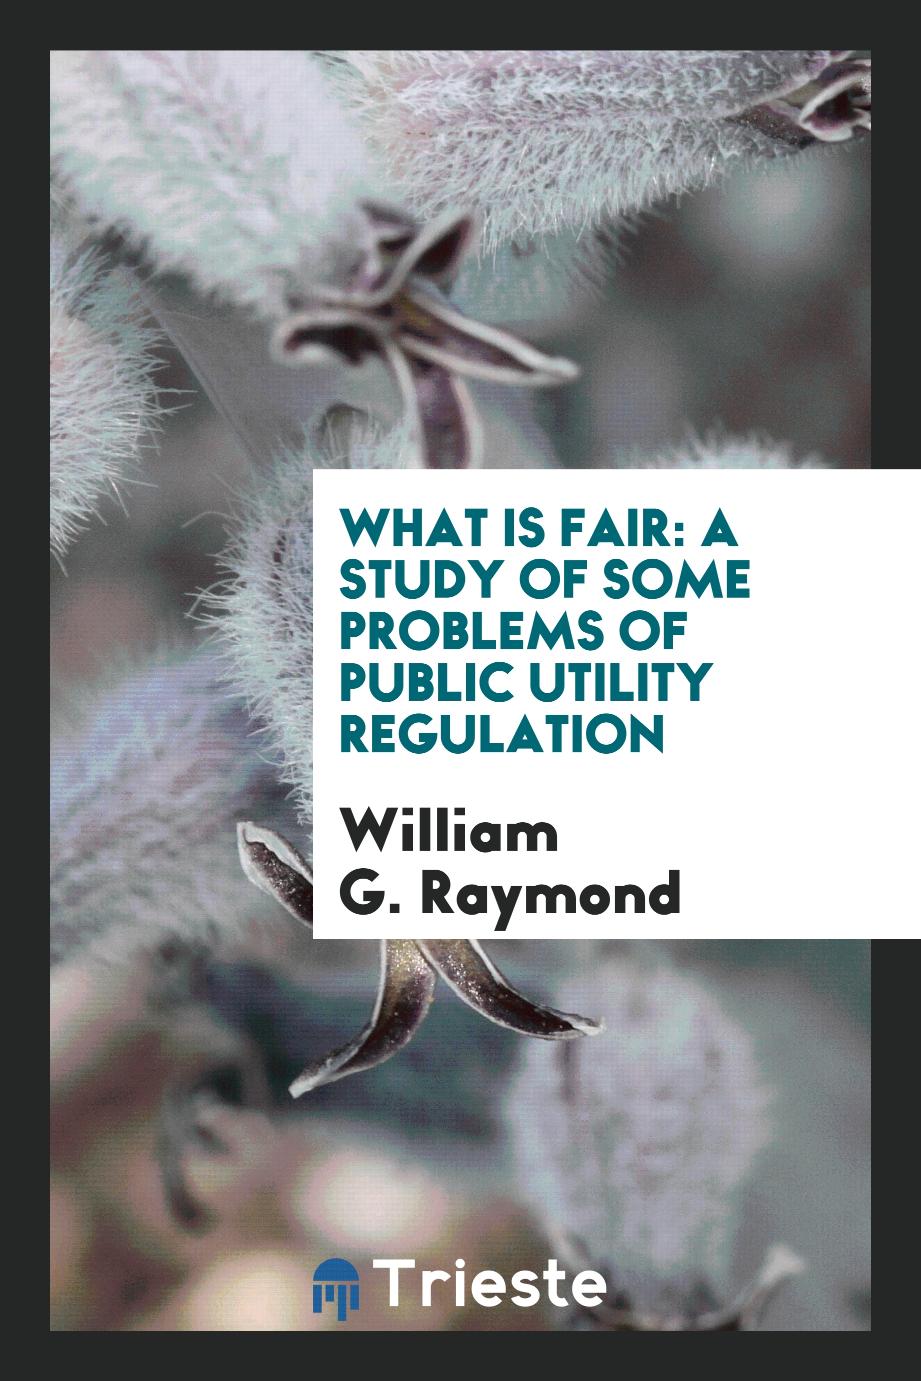 What is fair: a study of some problems of public utility regulation